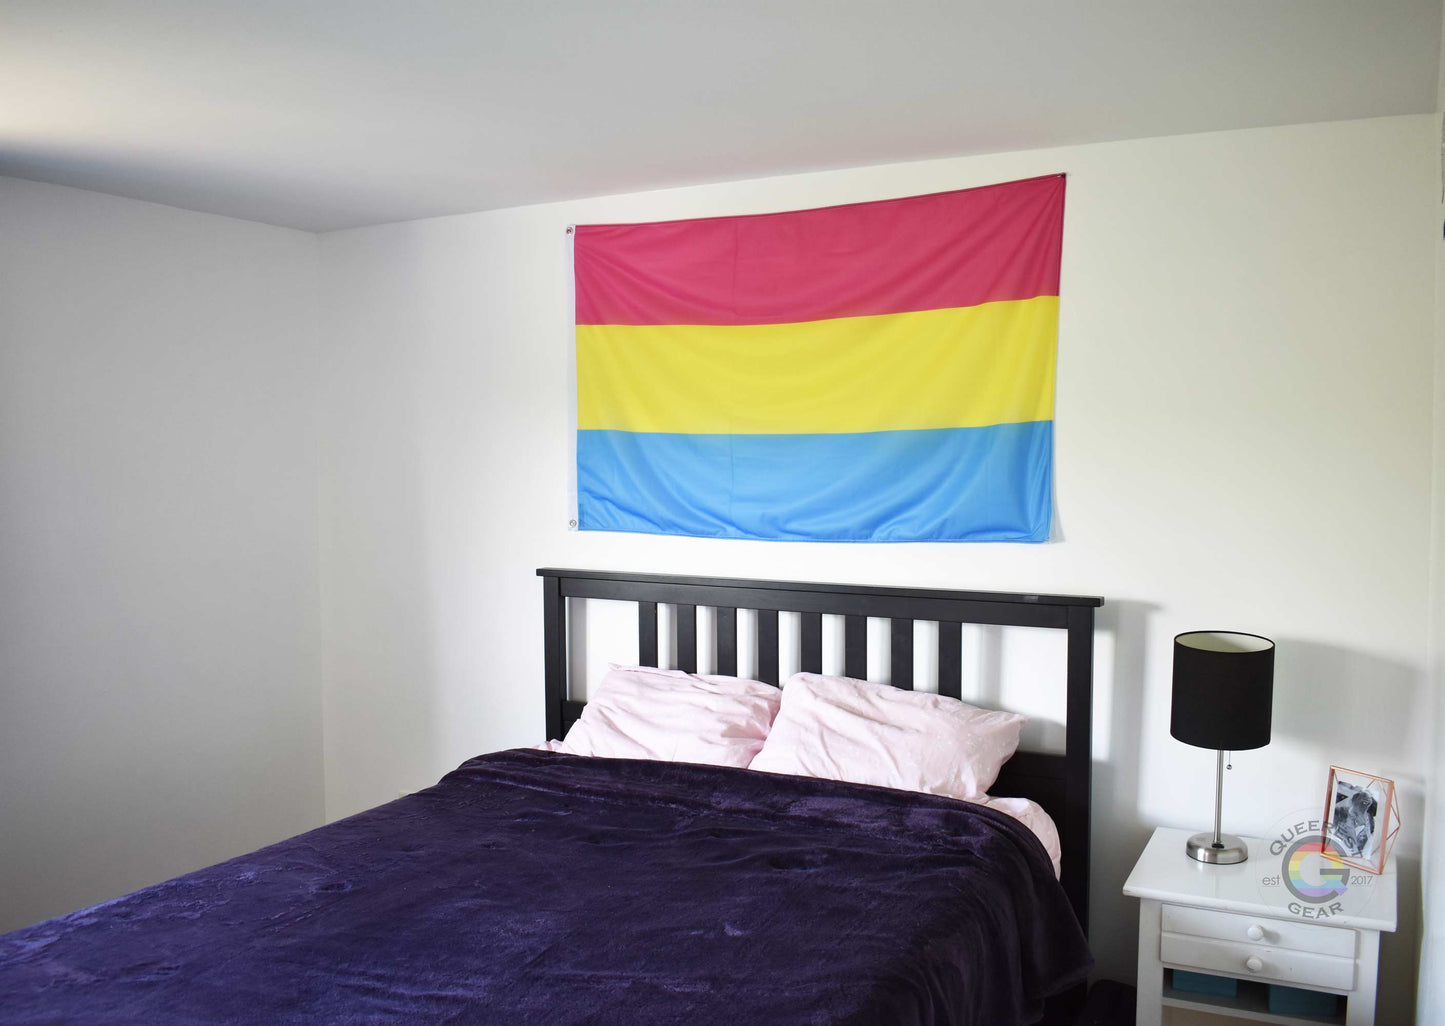 3’x5’ pansexual pride flag hanging horizontally on the wall of a bedroom centered above a bed with a purple blanket